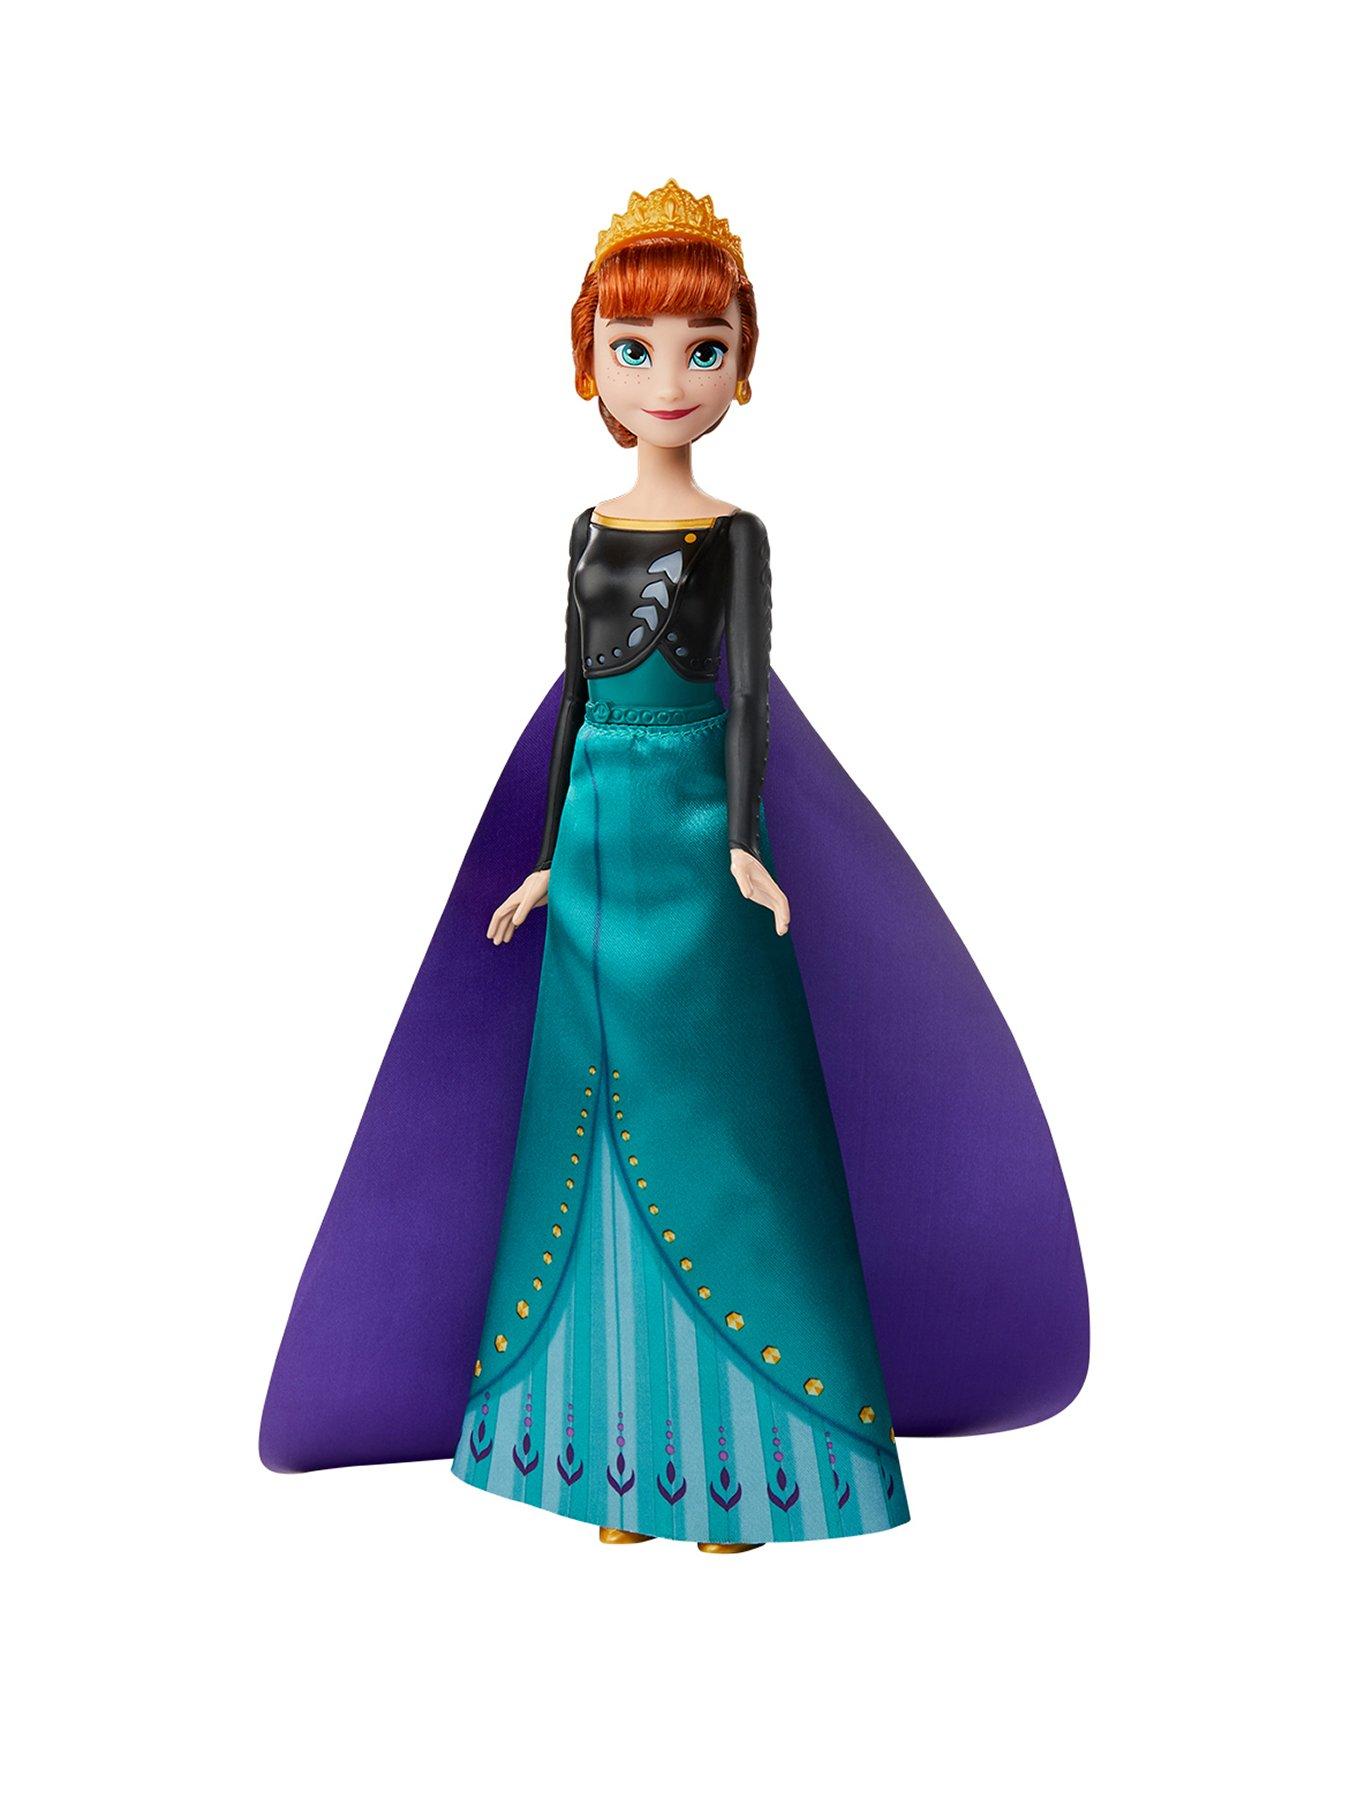 Details about   Disney Frozen 2 Anna & Elsa Royal Fashion with Clothes and Accessories NEW 